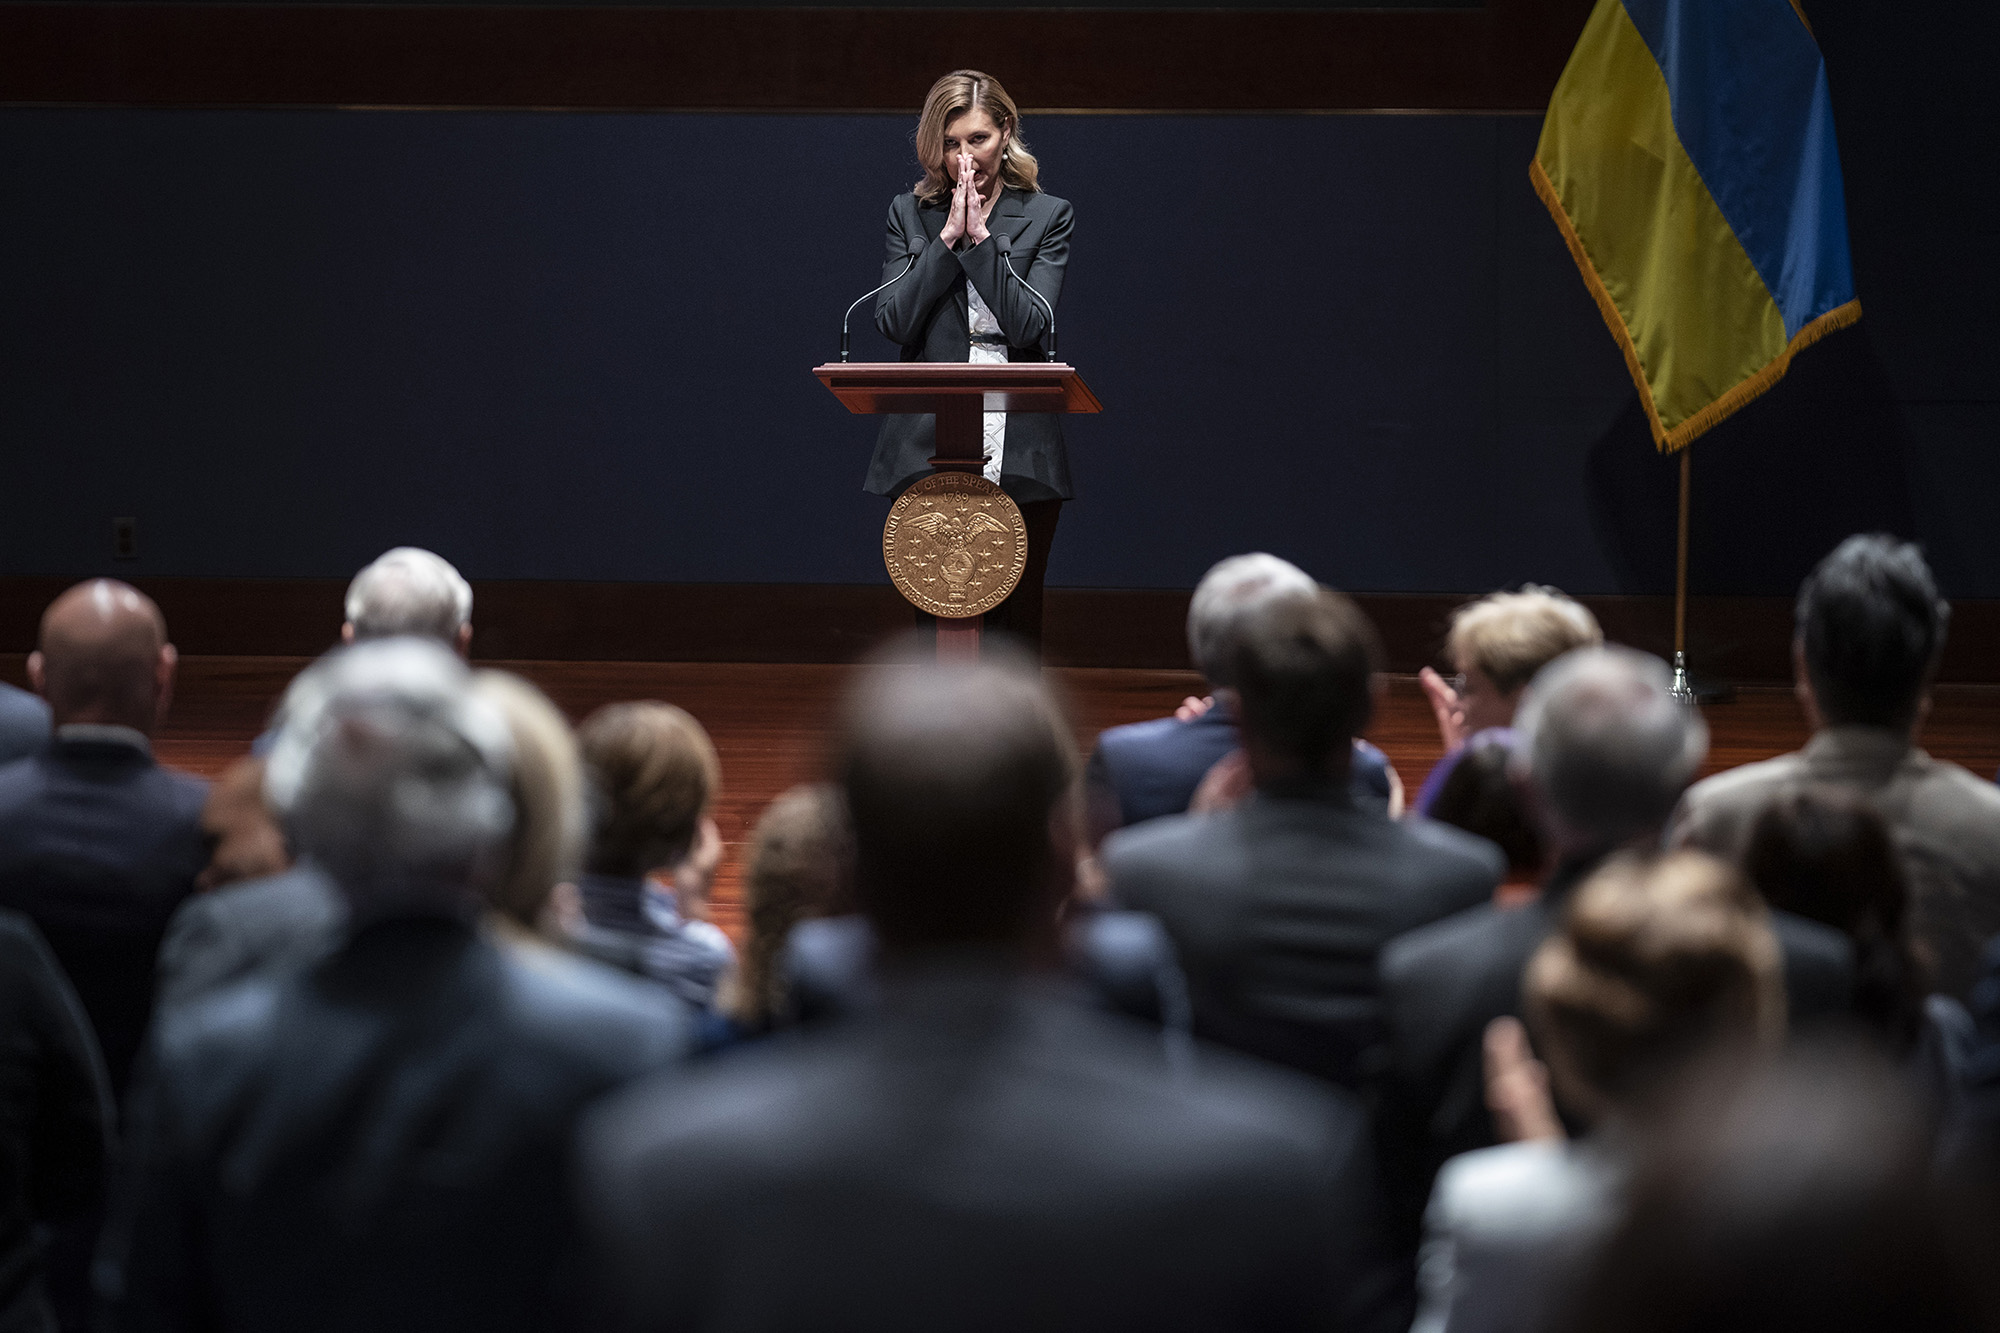 Olena Zelenska, the first lady of Ukraine, addresses members of Congress on Capitol Hill in Washington on Wednesday, July 20.